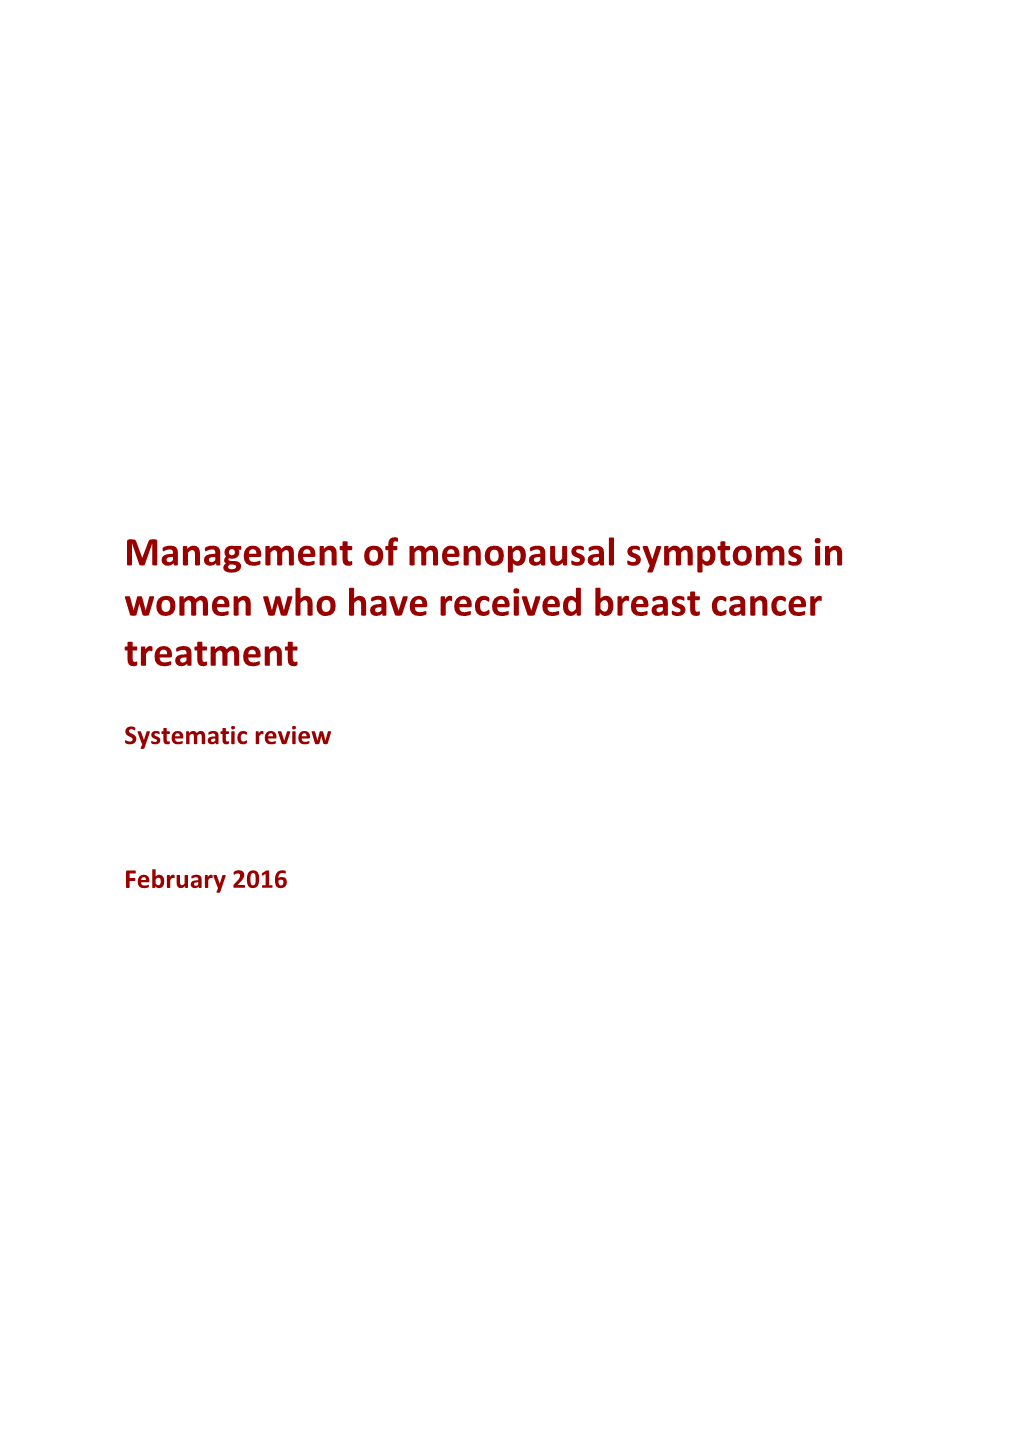 Management of Menopausal Symptoms in Women Who Have Received Breast Cancer Treatment